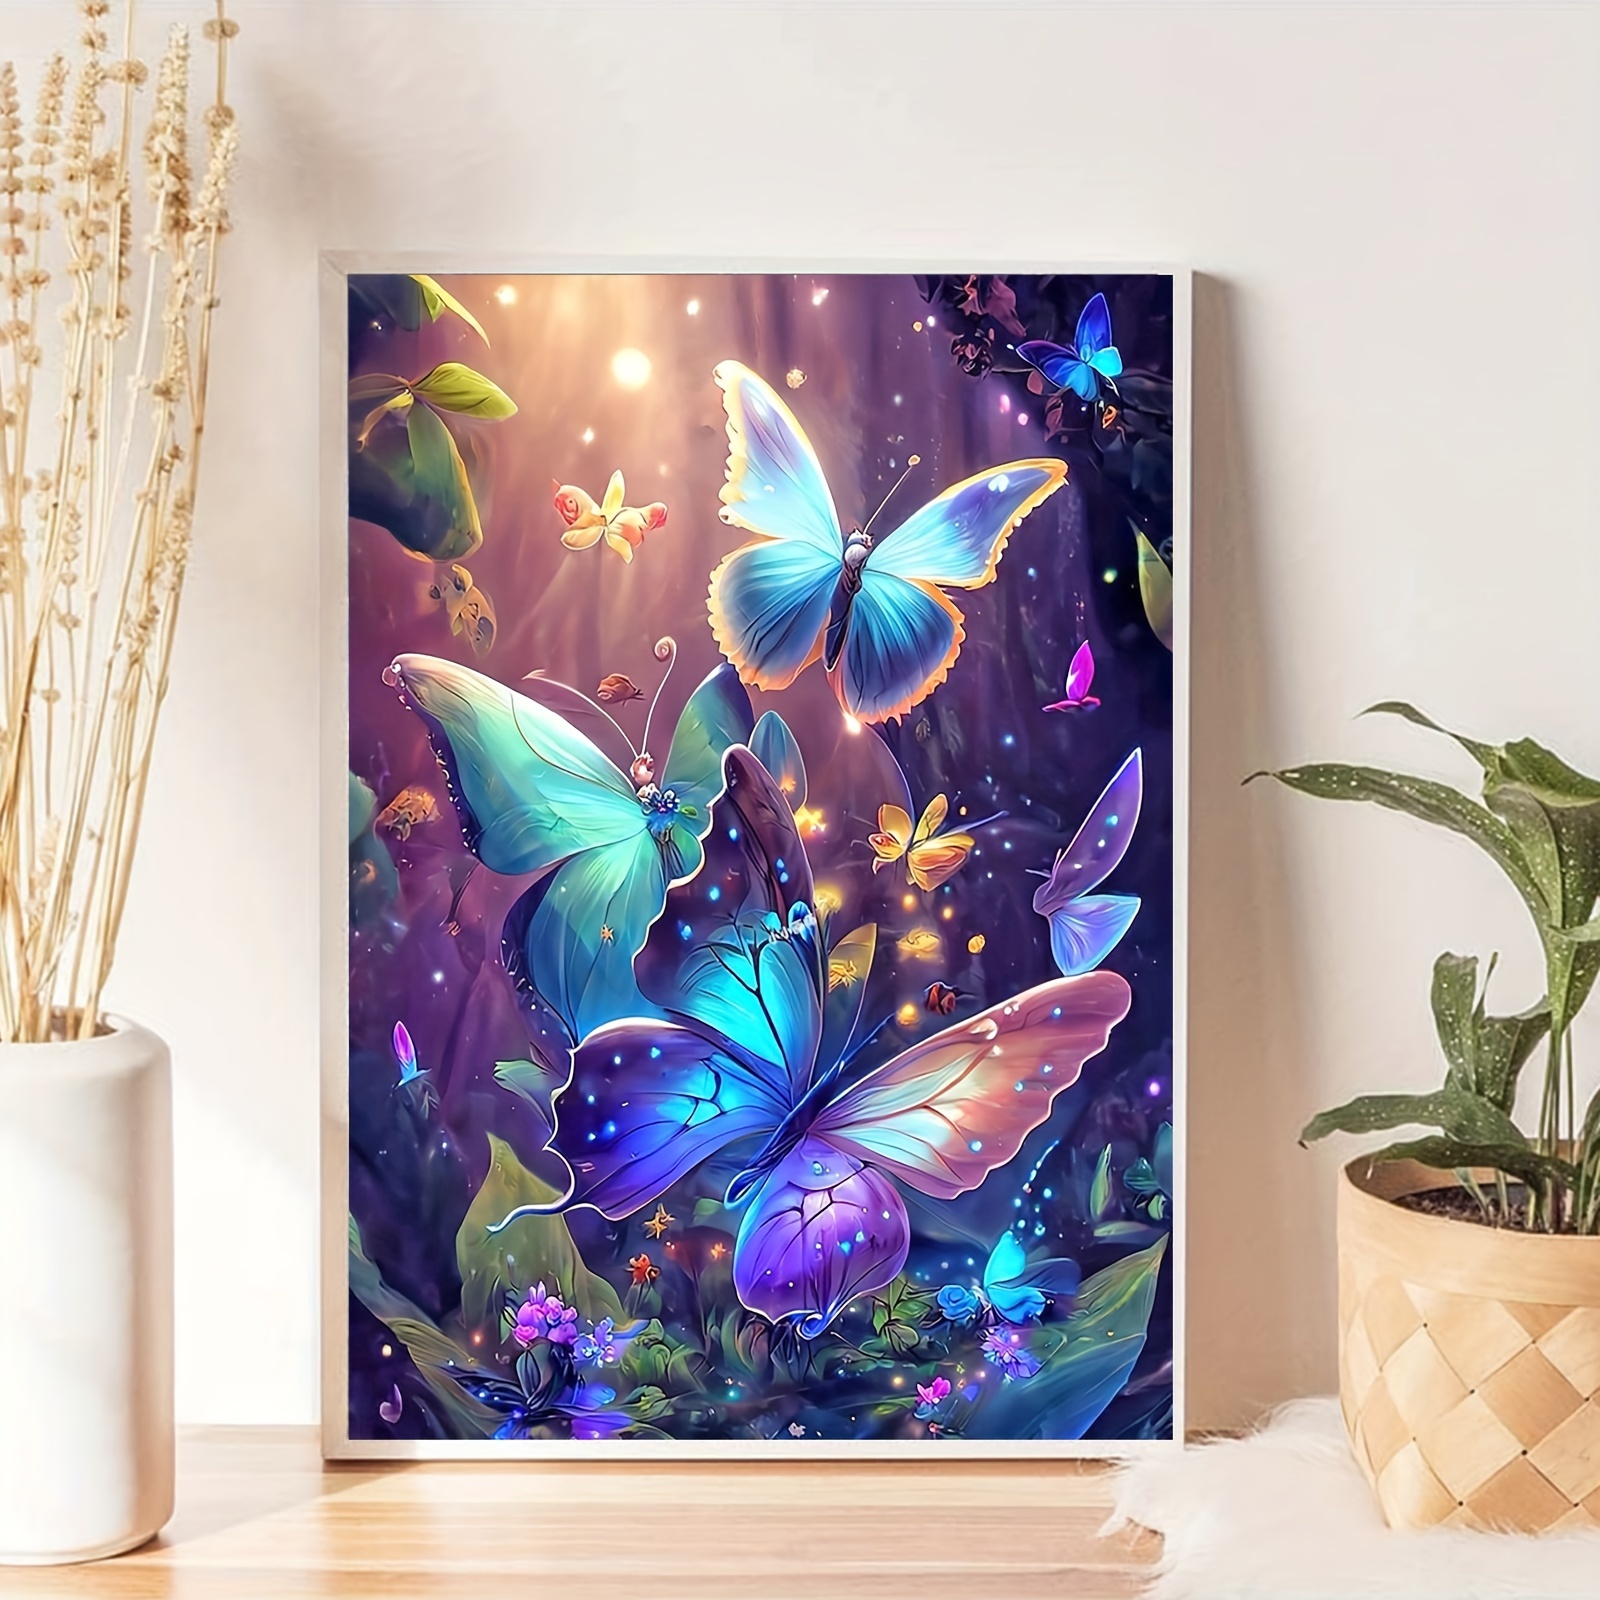 eniref 5D Diamond Painting Kits for Adults,Full Drill Diamond Art Animals Butterfly Rhinestone Painting with Diamonds Pictures Arts and Crafts for